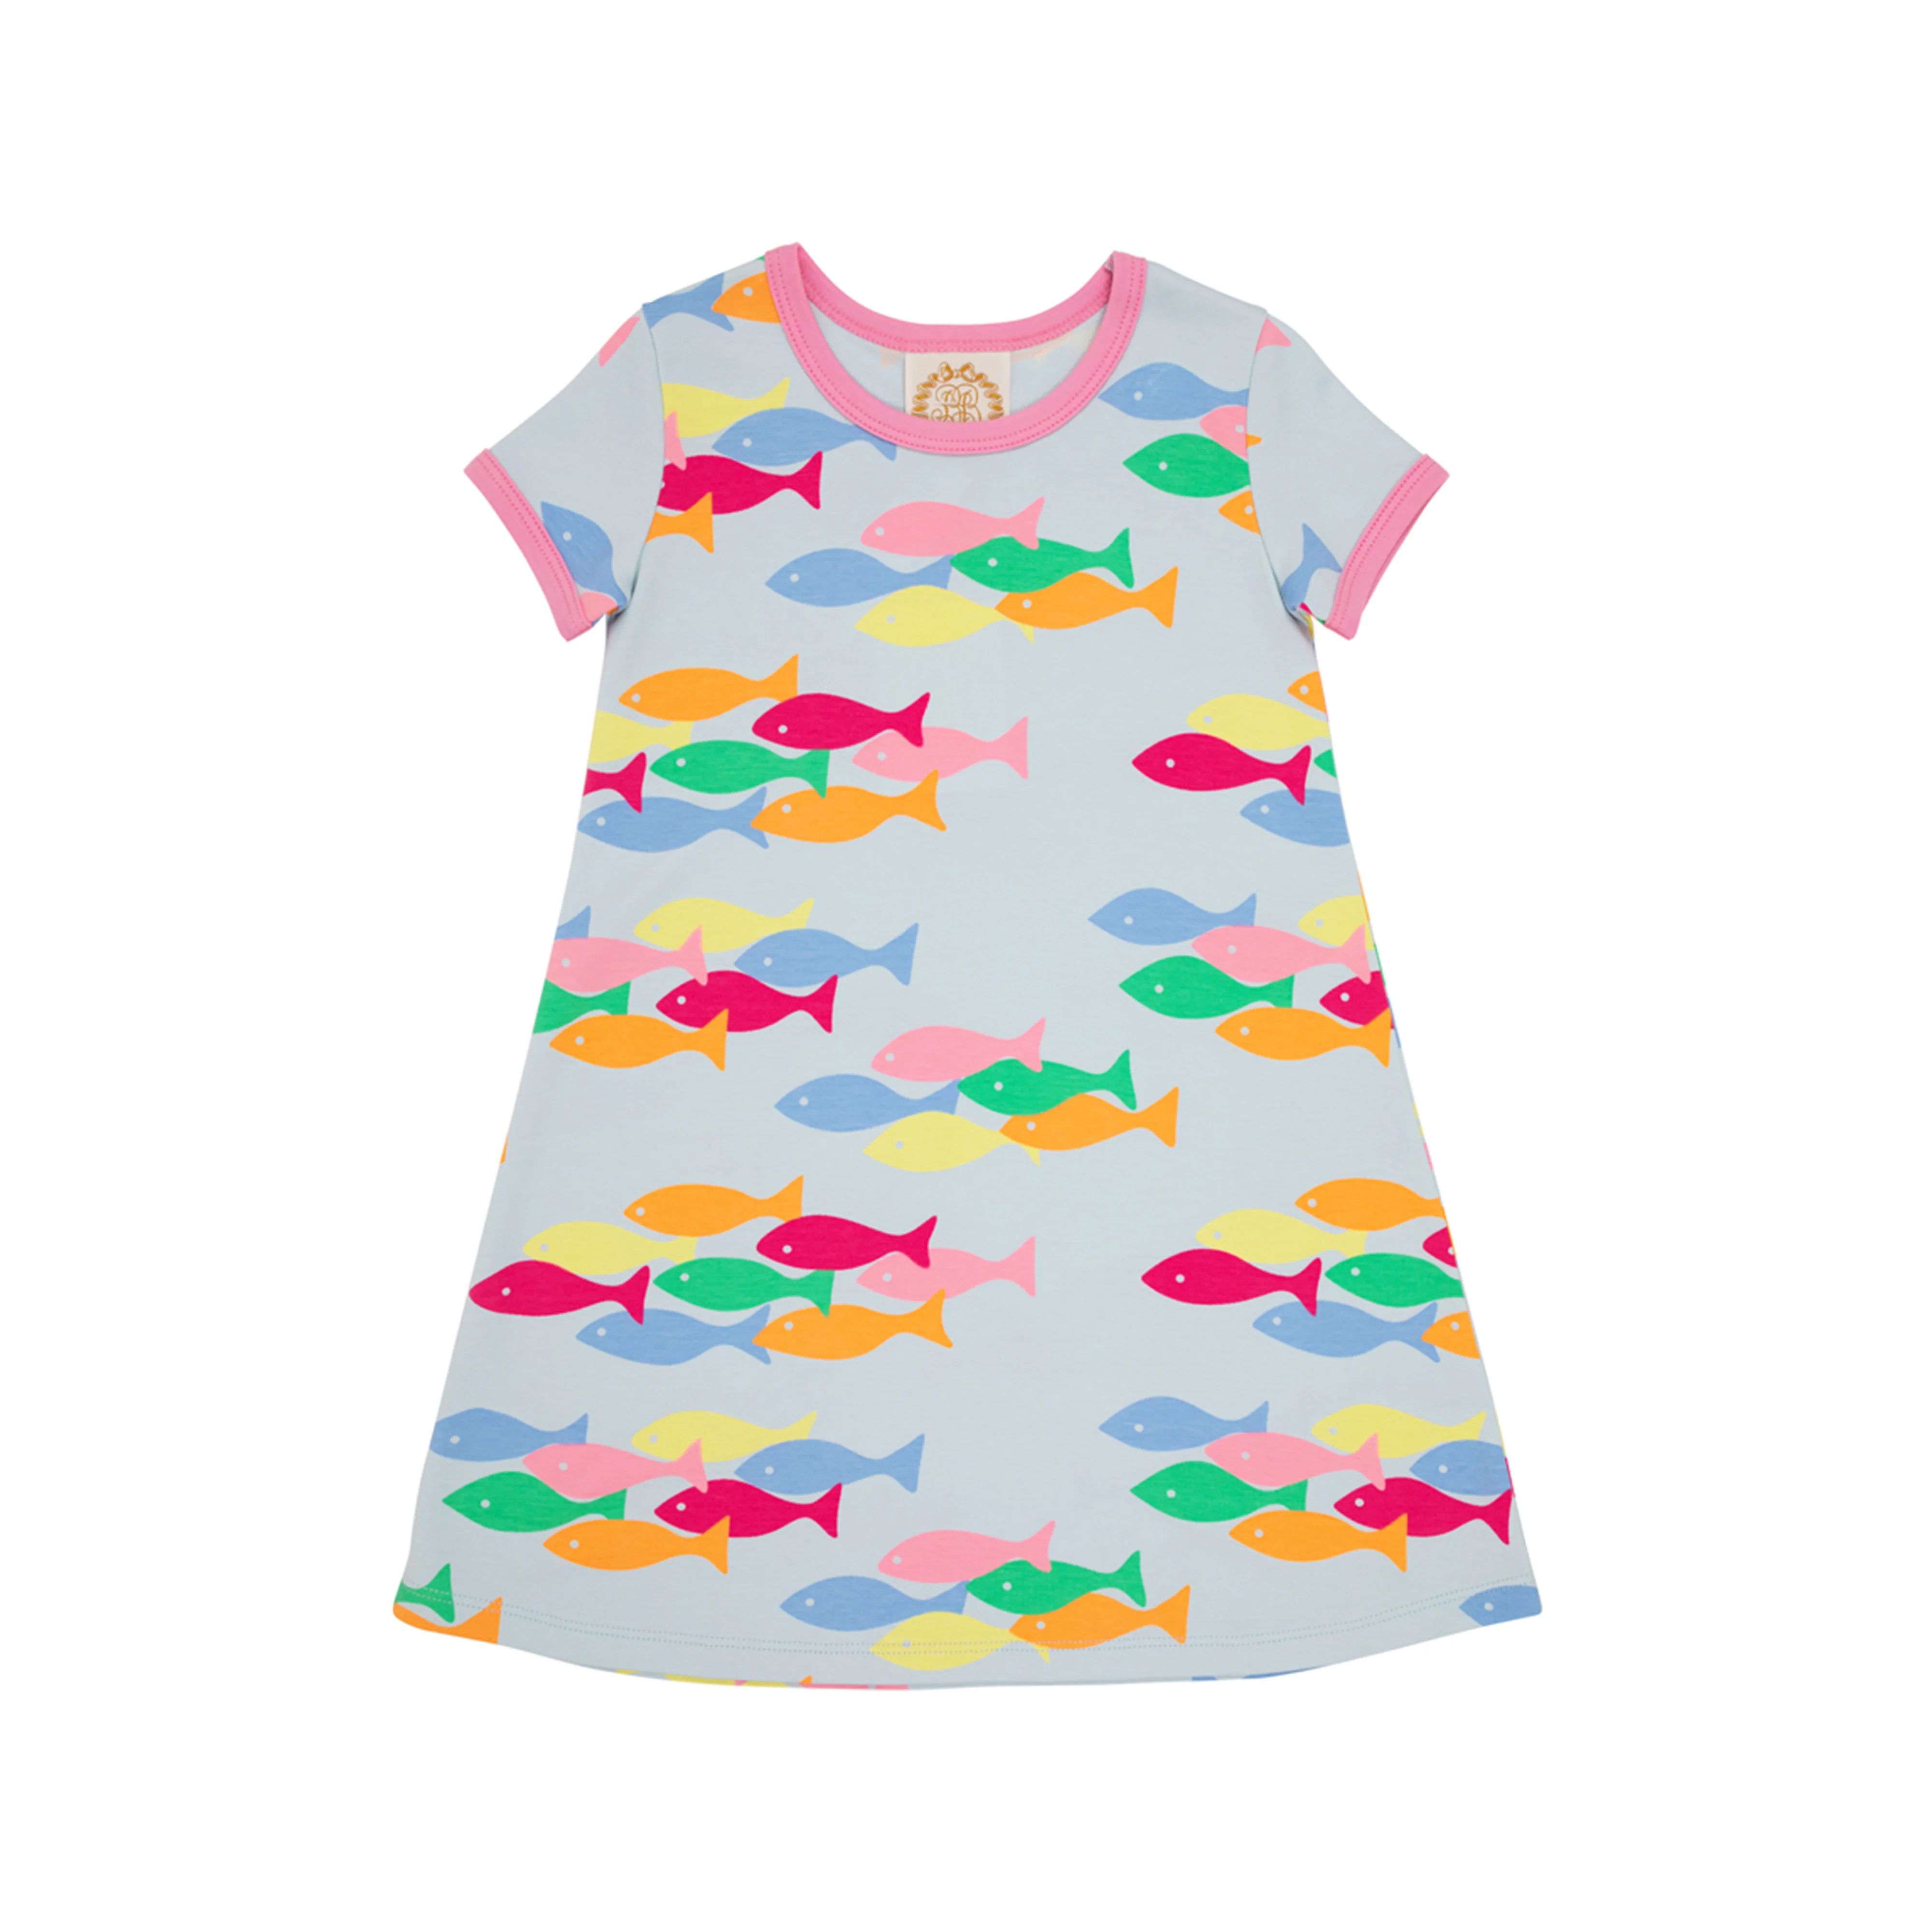 Polly Play Dress - French Leave Fishies with Hamptons Hot Pink | The Beaufort Bonnet Company